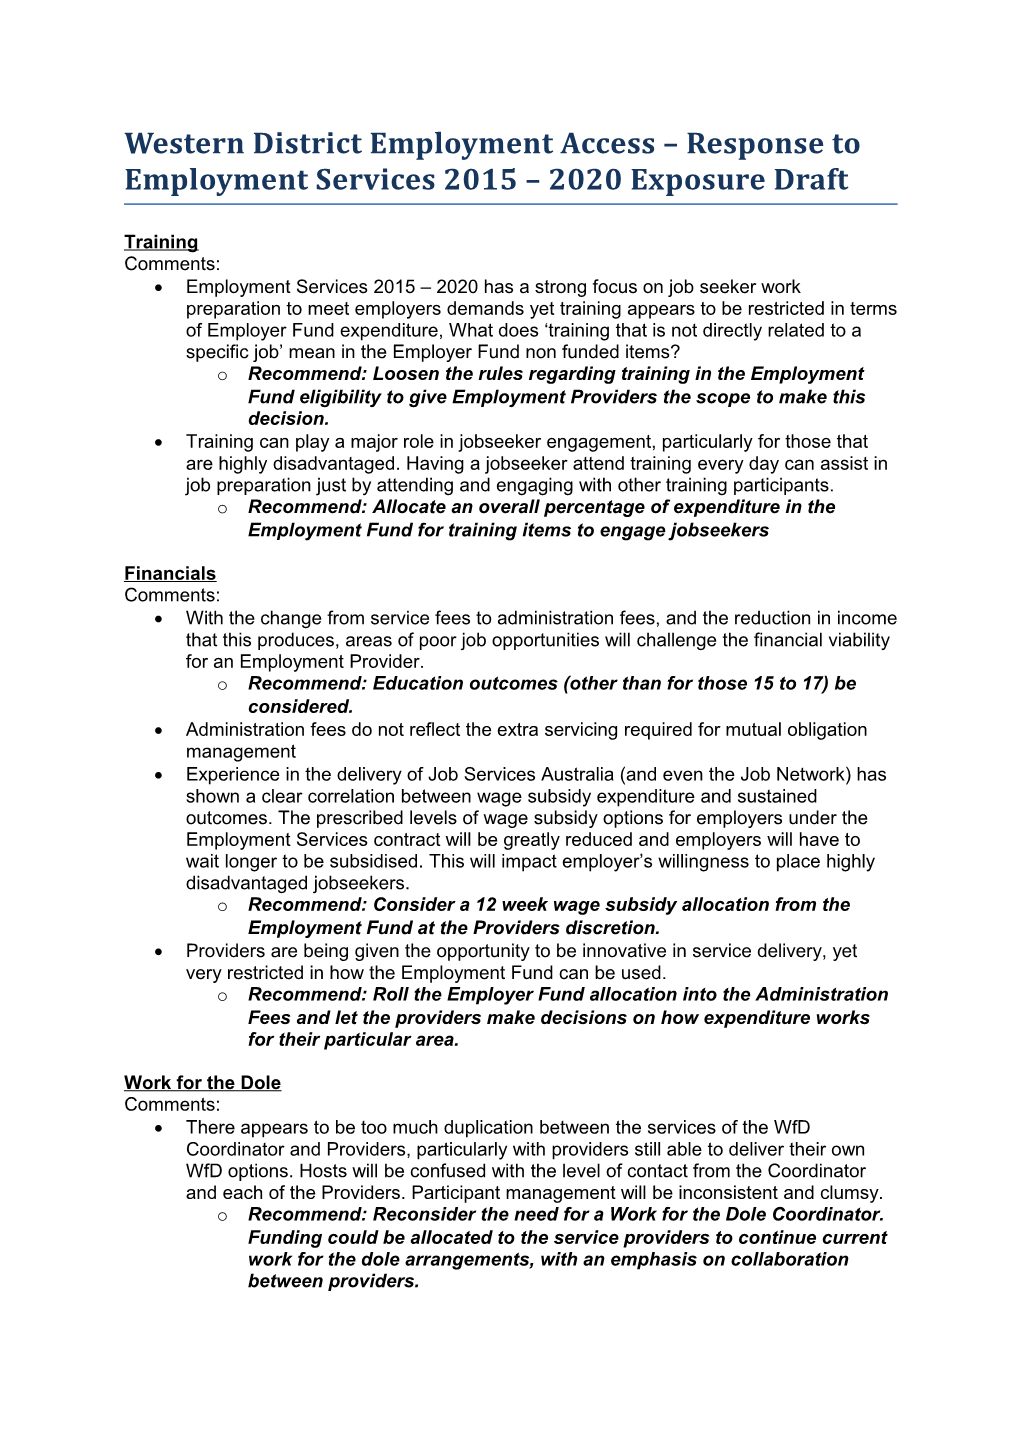 Western District Employment Access Response to Employment Services 2015 2020 Exposure Draft